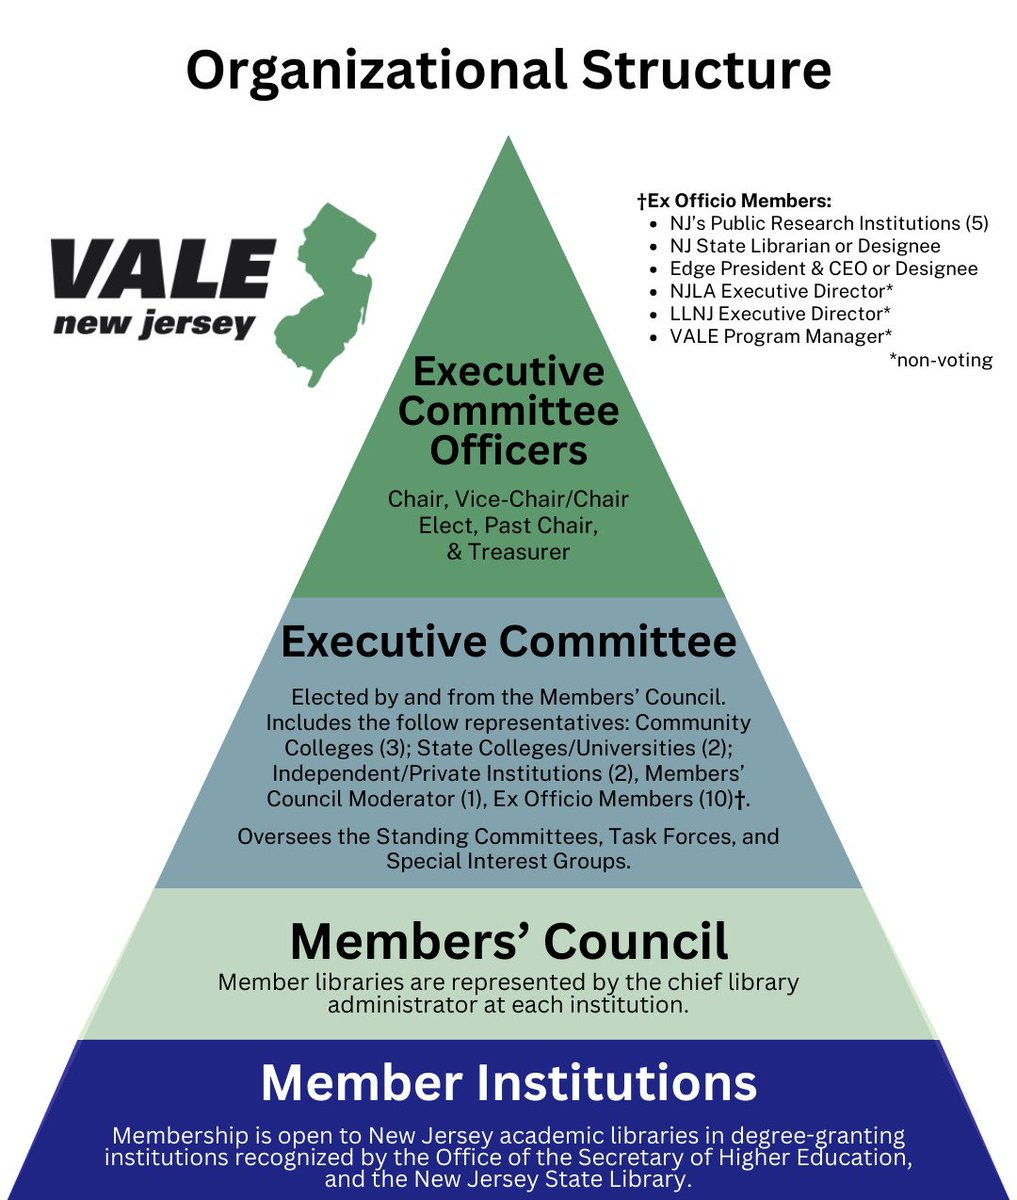 The VALE Members’ Council consists of the chief library administrators of all VALE member institutions. Its purpose is governance & networking. Visit our website to learn more about VALE’s governance & organization: vale.njedge.net/about-us/gover…

@librarylinknj @njstatelibrary @njla